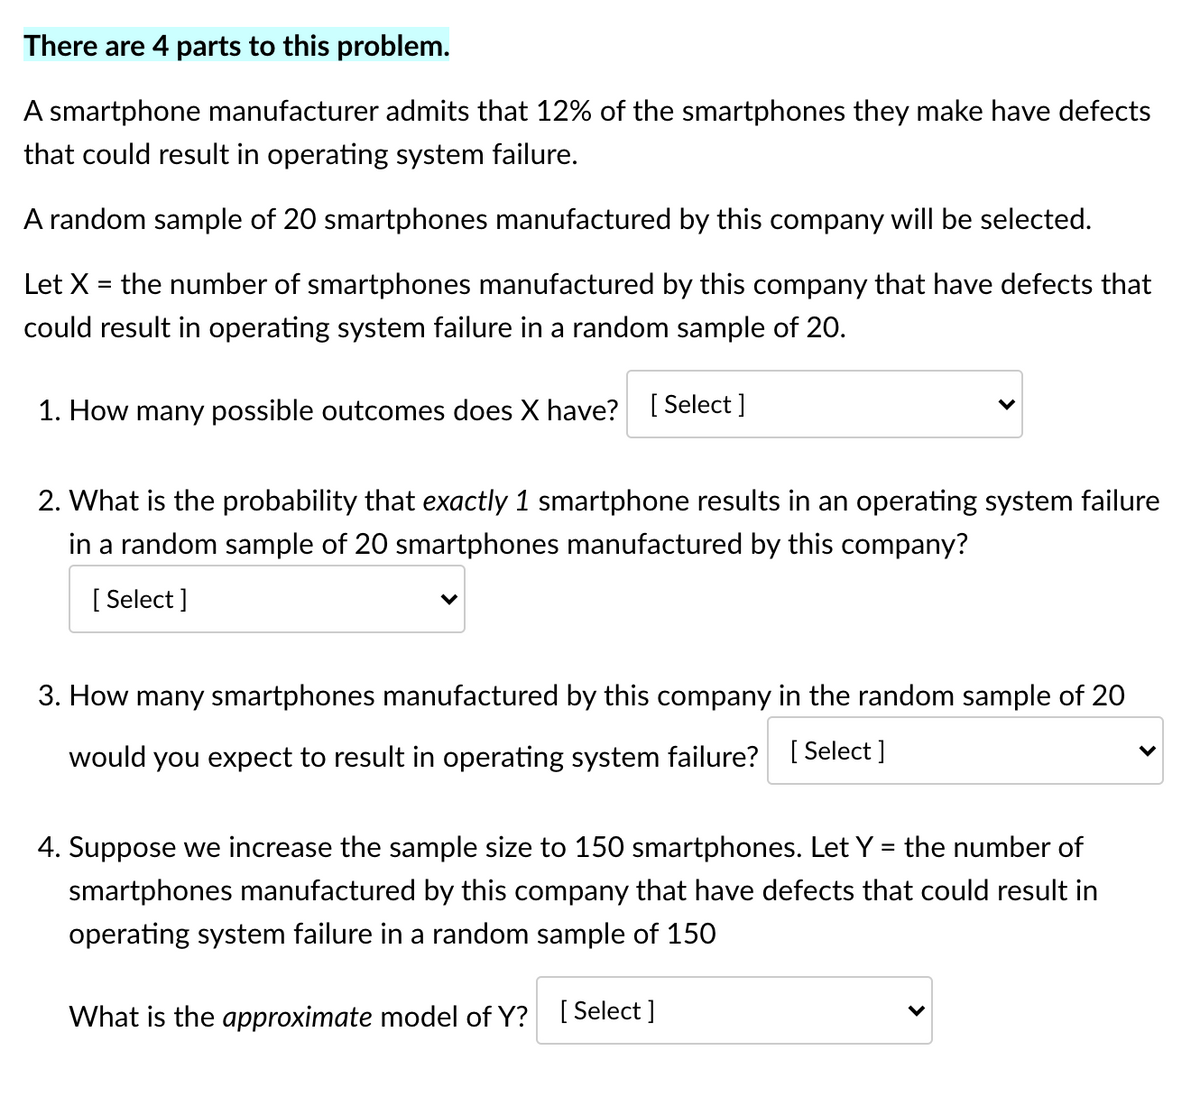 There are 4 parts to this problem.
A smartphone manufacturer admits that 12% of the smartphones they make have defects
that could result in operating system failure.
A random sample of 20 smartphones manufactured by this company will be selected.
Let X = the number of smartphones manufactured by this company that have defects that
could result in operating system failure in a random sample of 20.
1. How many possible outcomes does X have?
[ Select ]
2. What is the probability that exactly 1 smartphone results in an operating system failure
in a random sample of 20 smartphones manufactured by this company?
[ Select ]
3. How many smartphones manufactured by this company in the random sample of 20
would you expect to result in operating system failure? [Select ]
4. Suppose we increase the sample size to 150 smartphones. Let Y = the number of
smartphones manufactured by this company that have defects that could result in
operating system failure in a random sample of 150
What is the approximate model of Y? [ Select]
